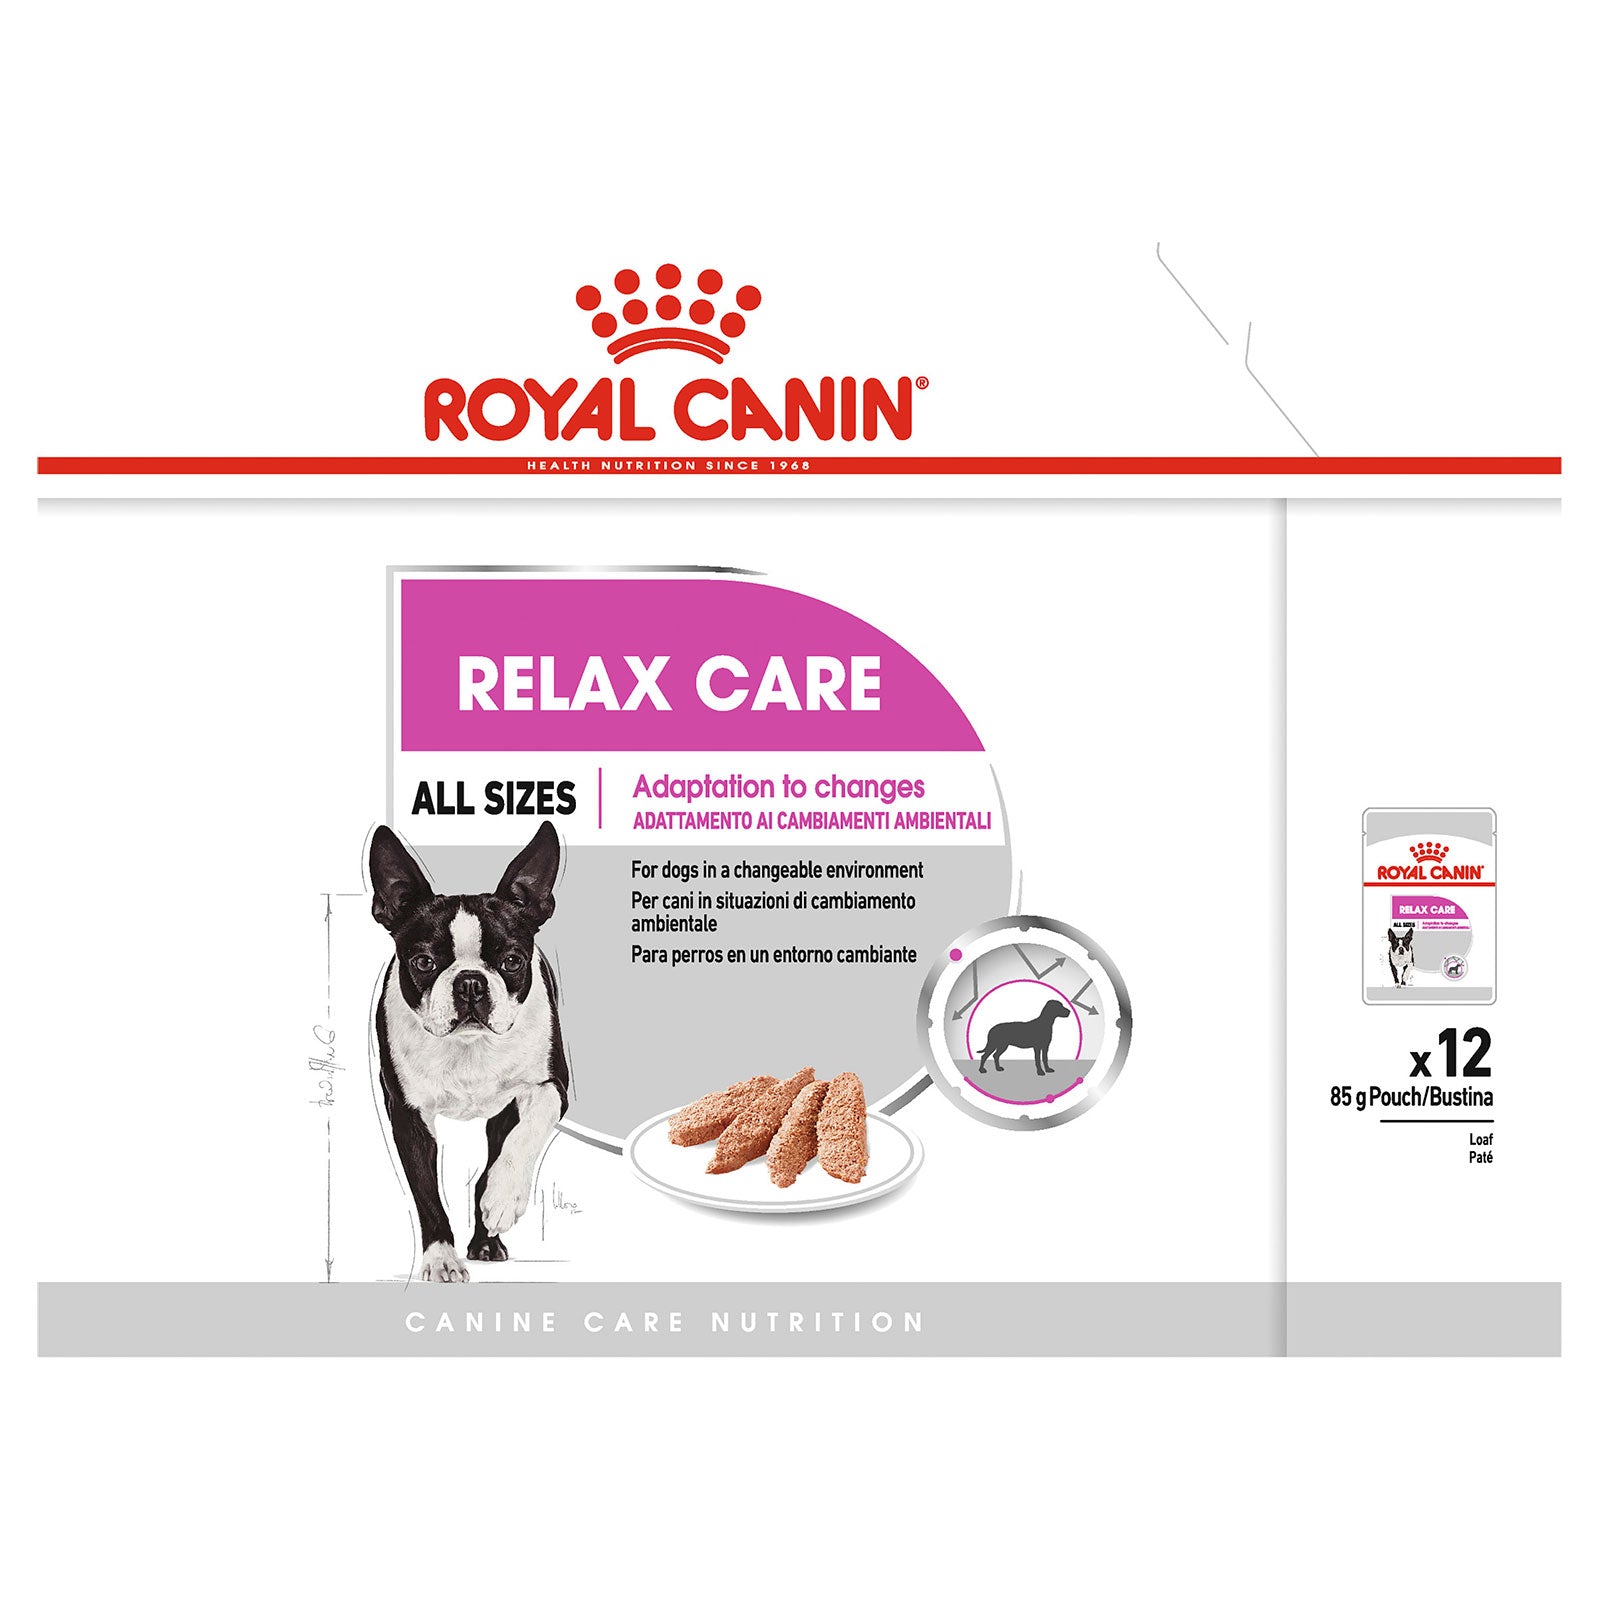 Royal Canin Dog Food Pouch Relax Care